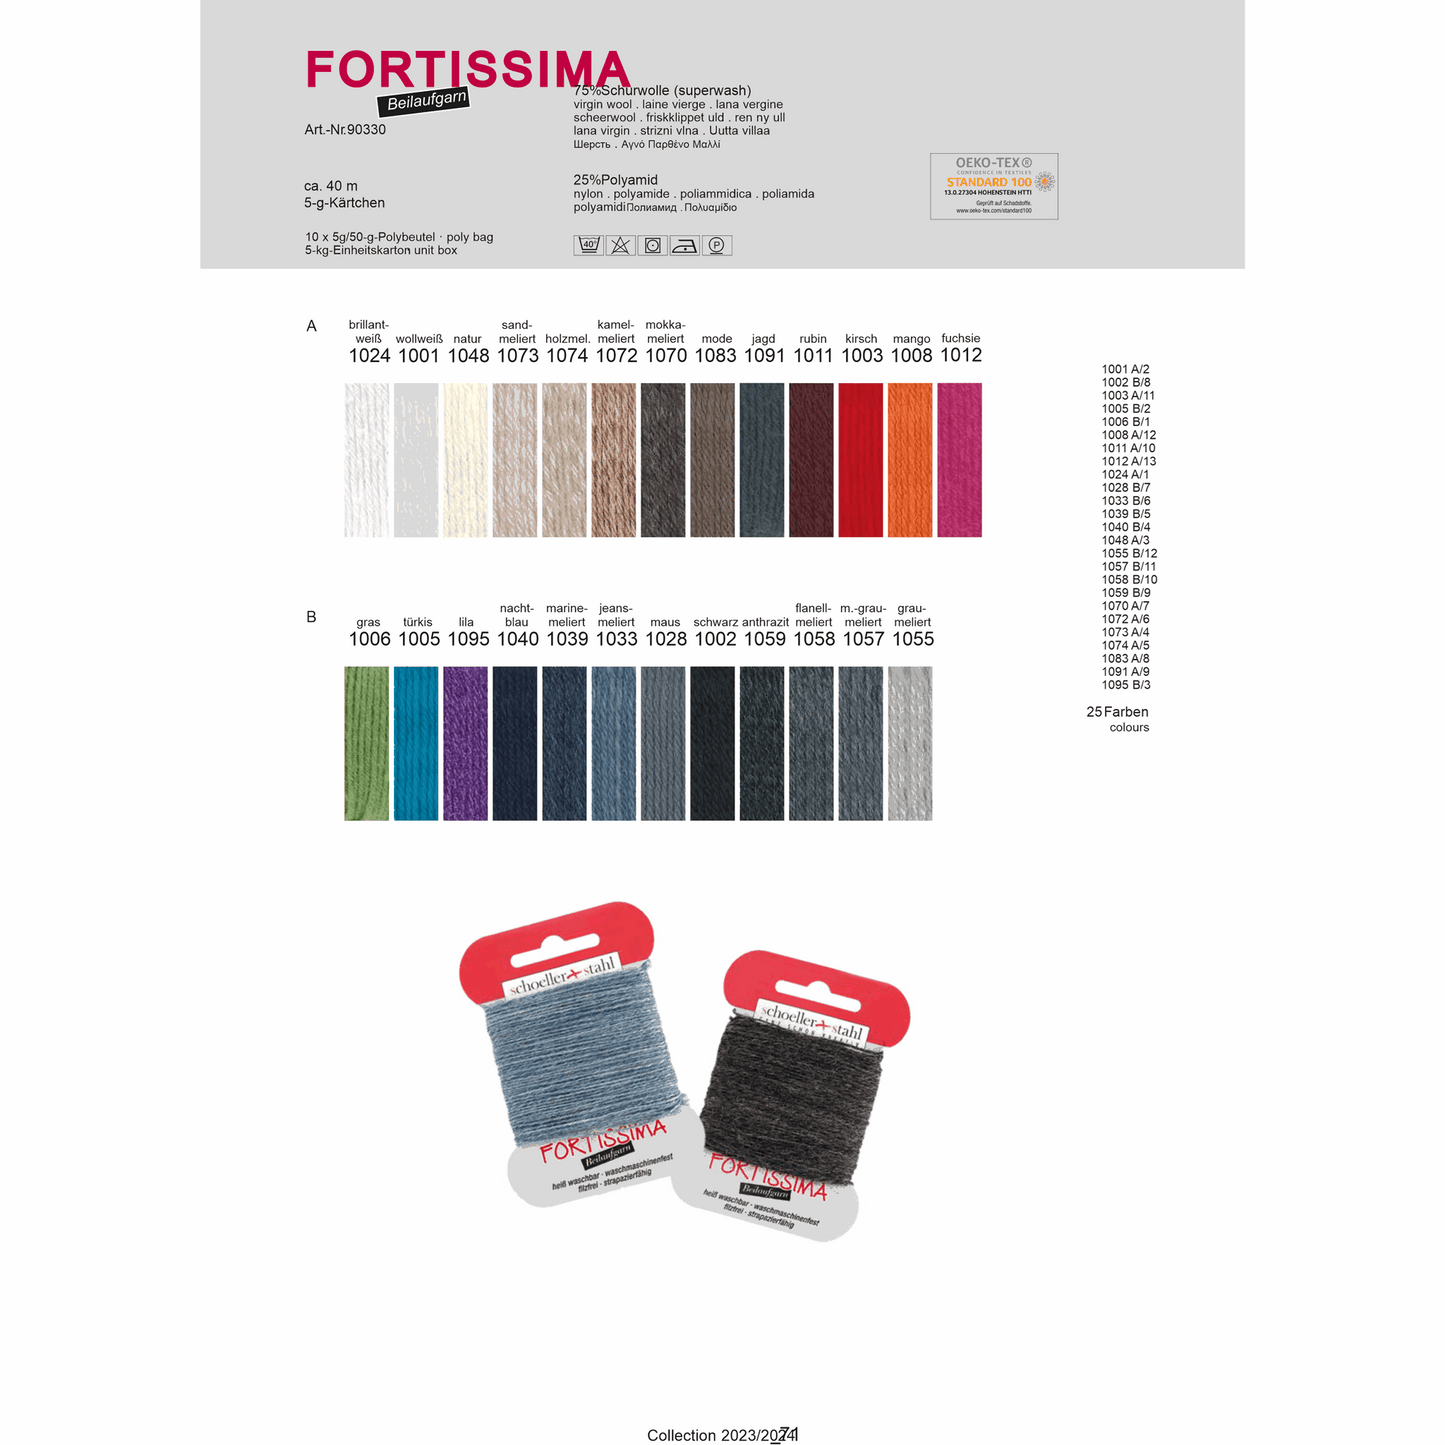 Fortissima thread 5g, 90330, color 1091, hunting